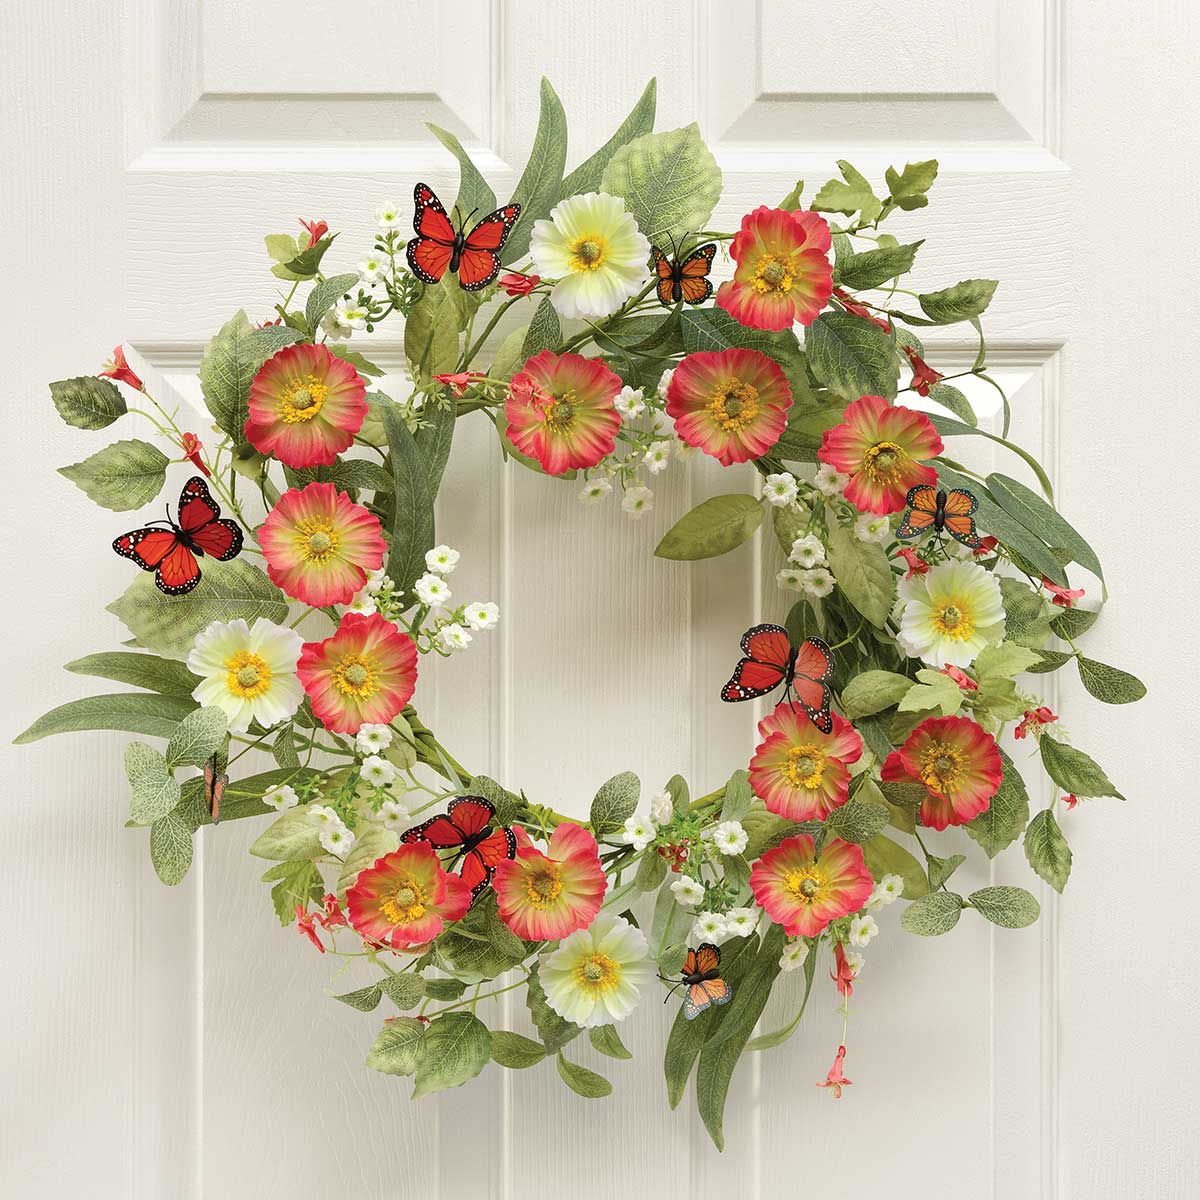 Coral Fair Poppy and Butterfly Wreath 25" (inner ring 10”)